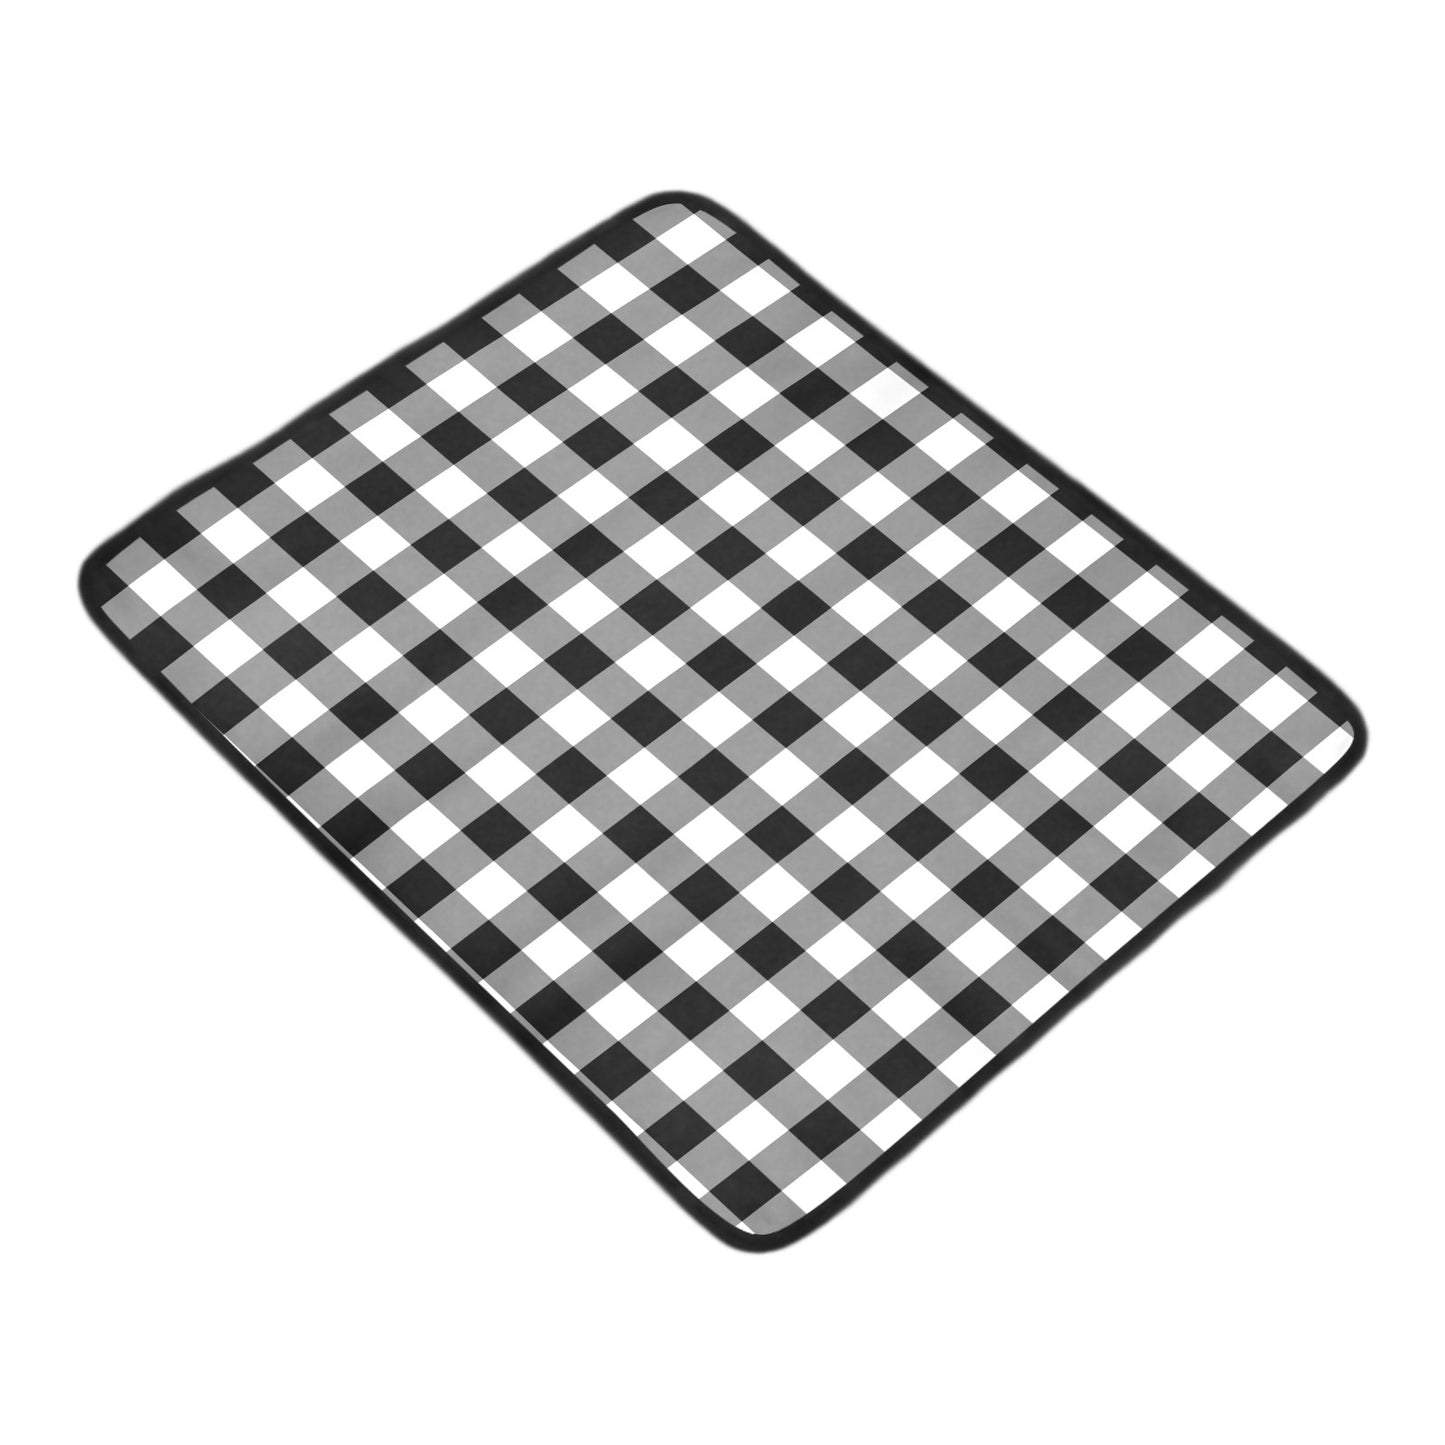 Buffalo Plaid Waterproof Blanket, Black White Outdoor Picnic Beach Camping Yoga Mat Throw Outdoor Festival Pool Accessories